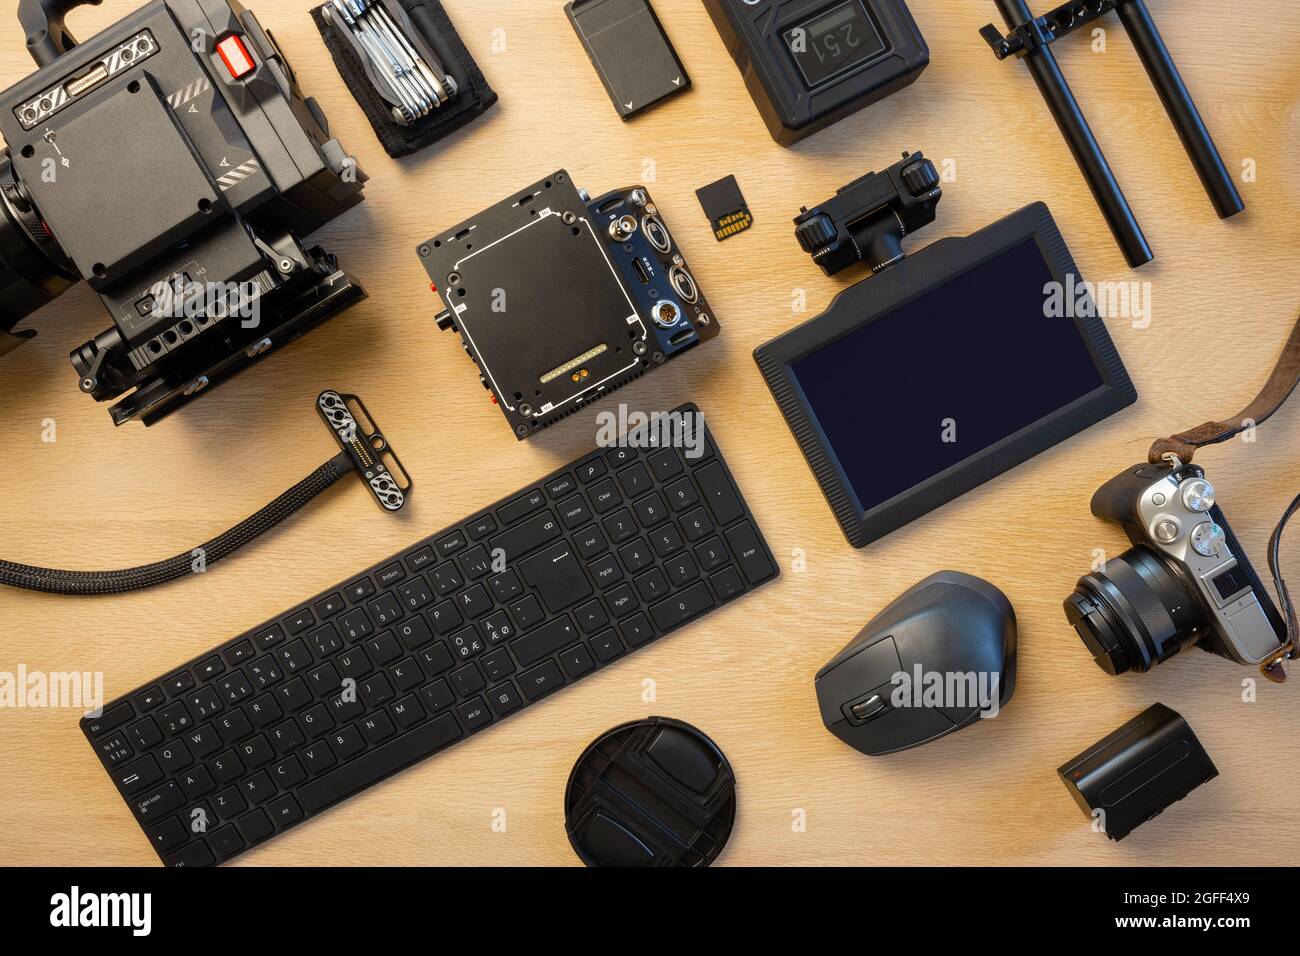 Flat lay of filming equipment with computer parts on table Stock Photo